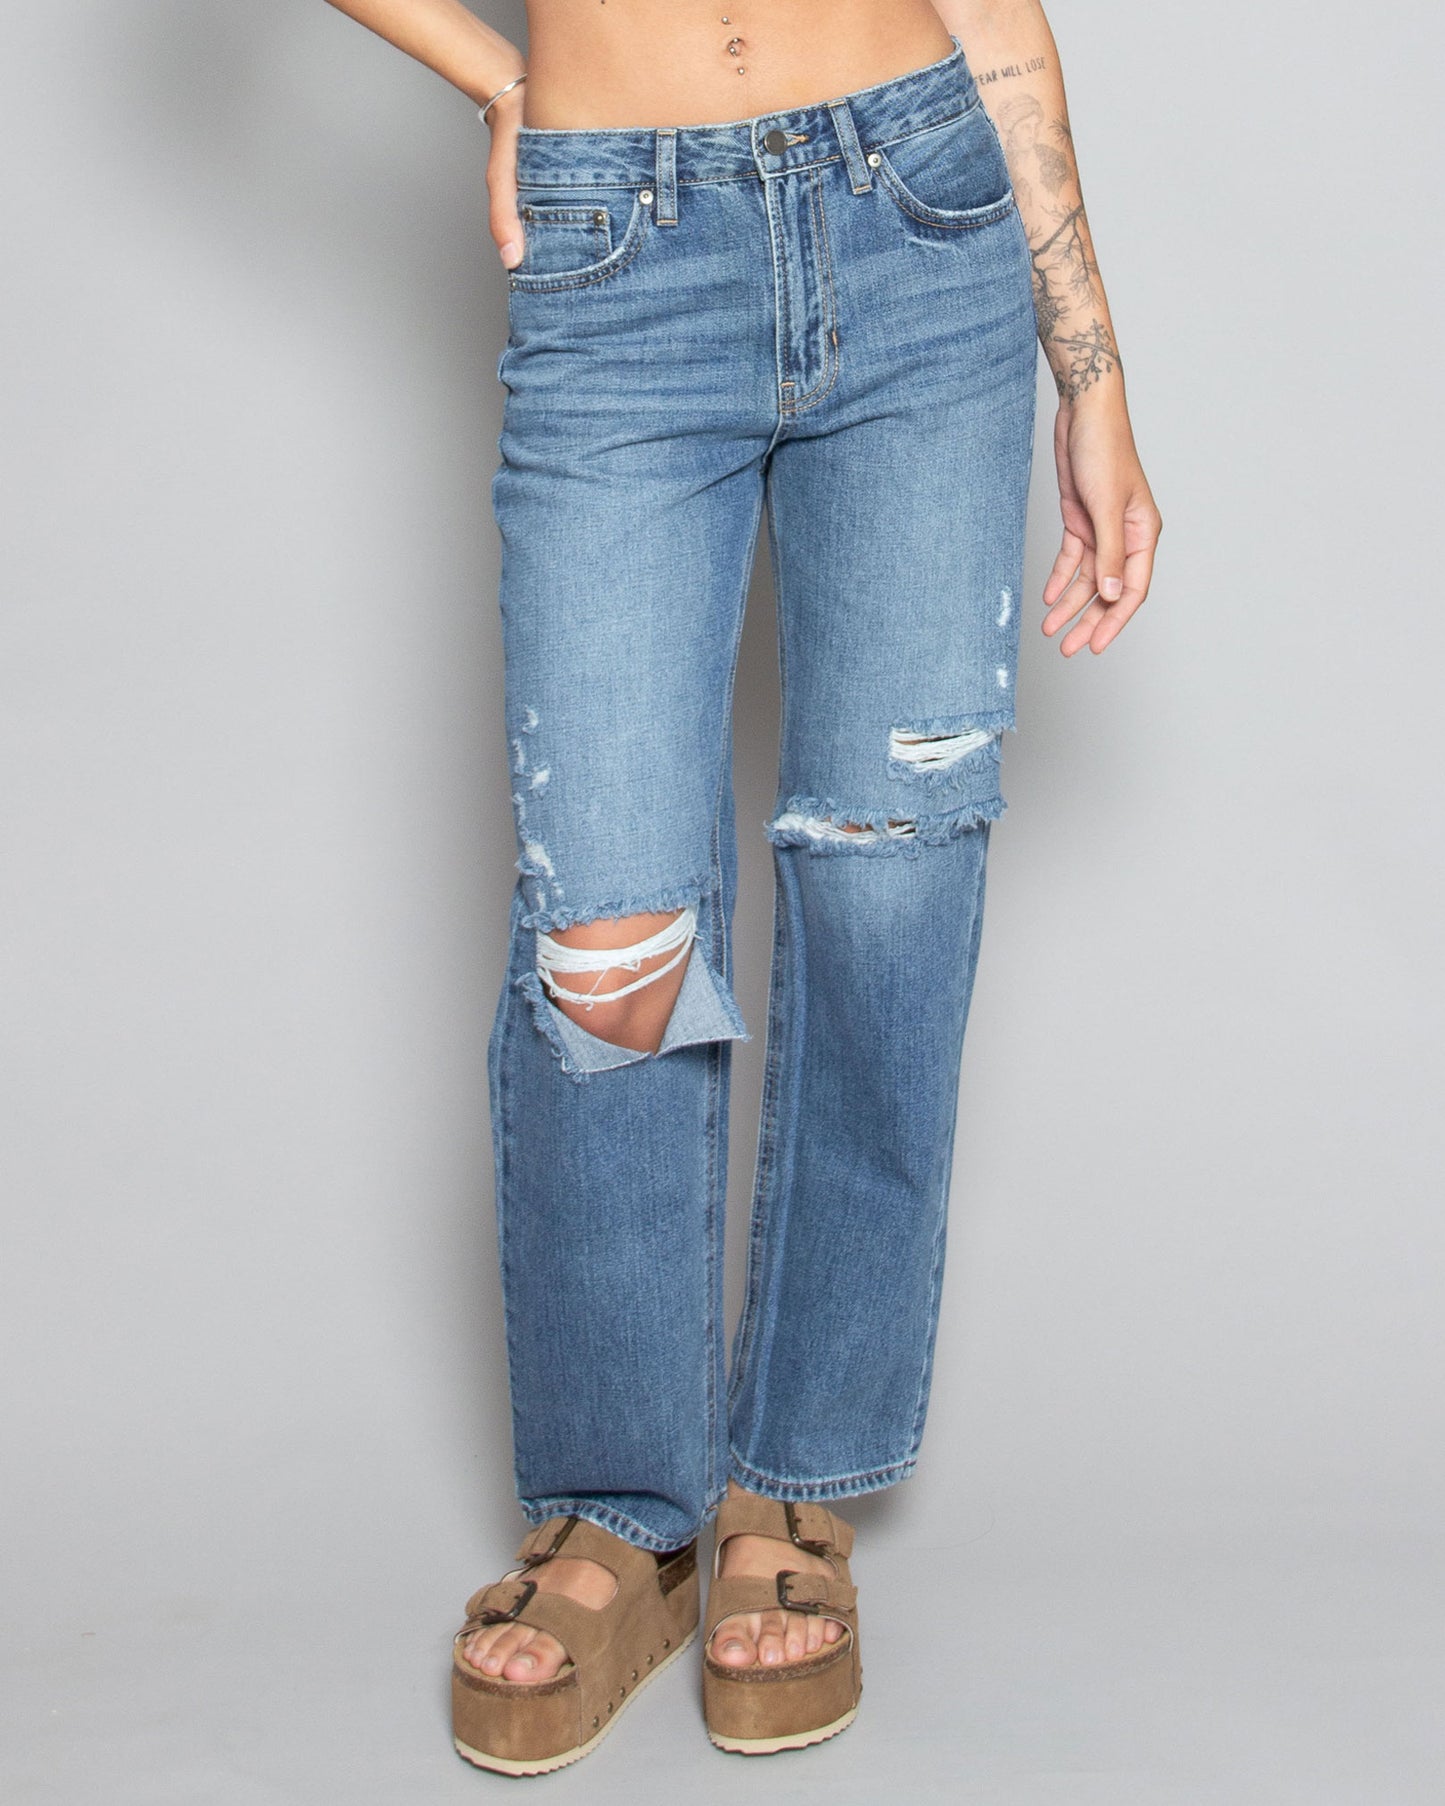 PERSONS Talia Relaxed BF Jeans in Med Wash available at Lahn.shop